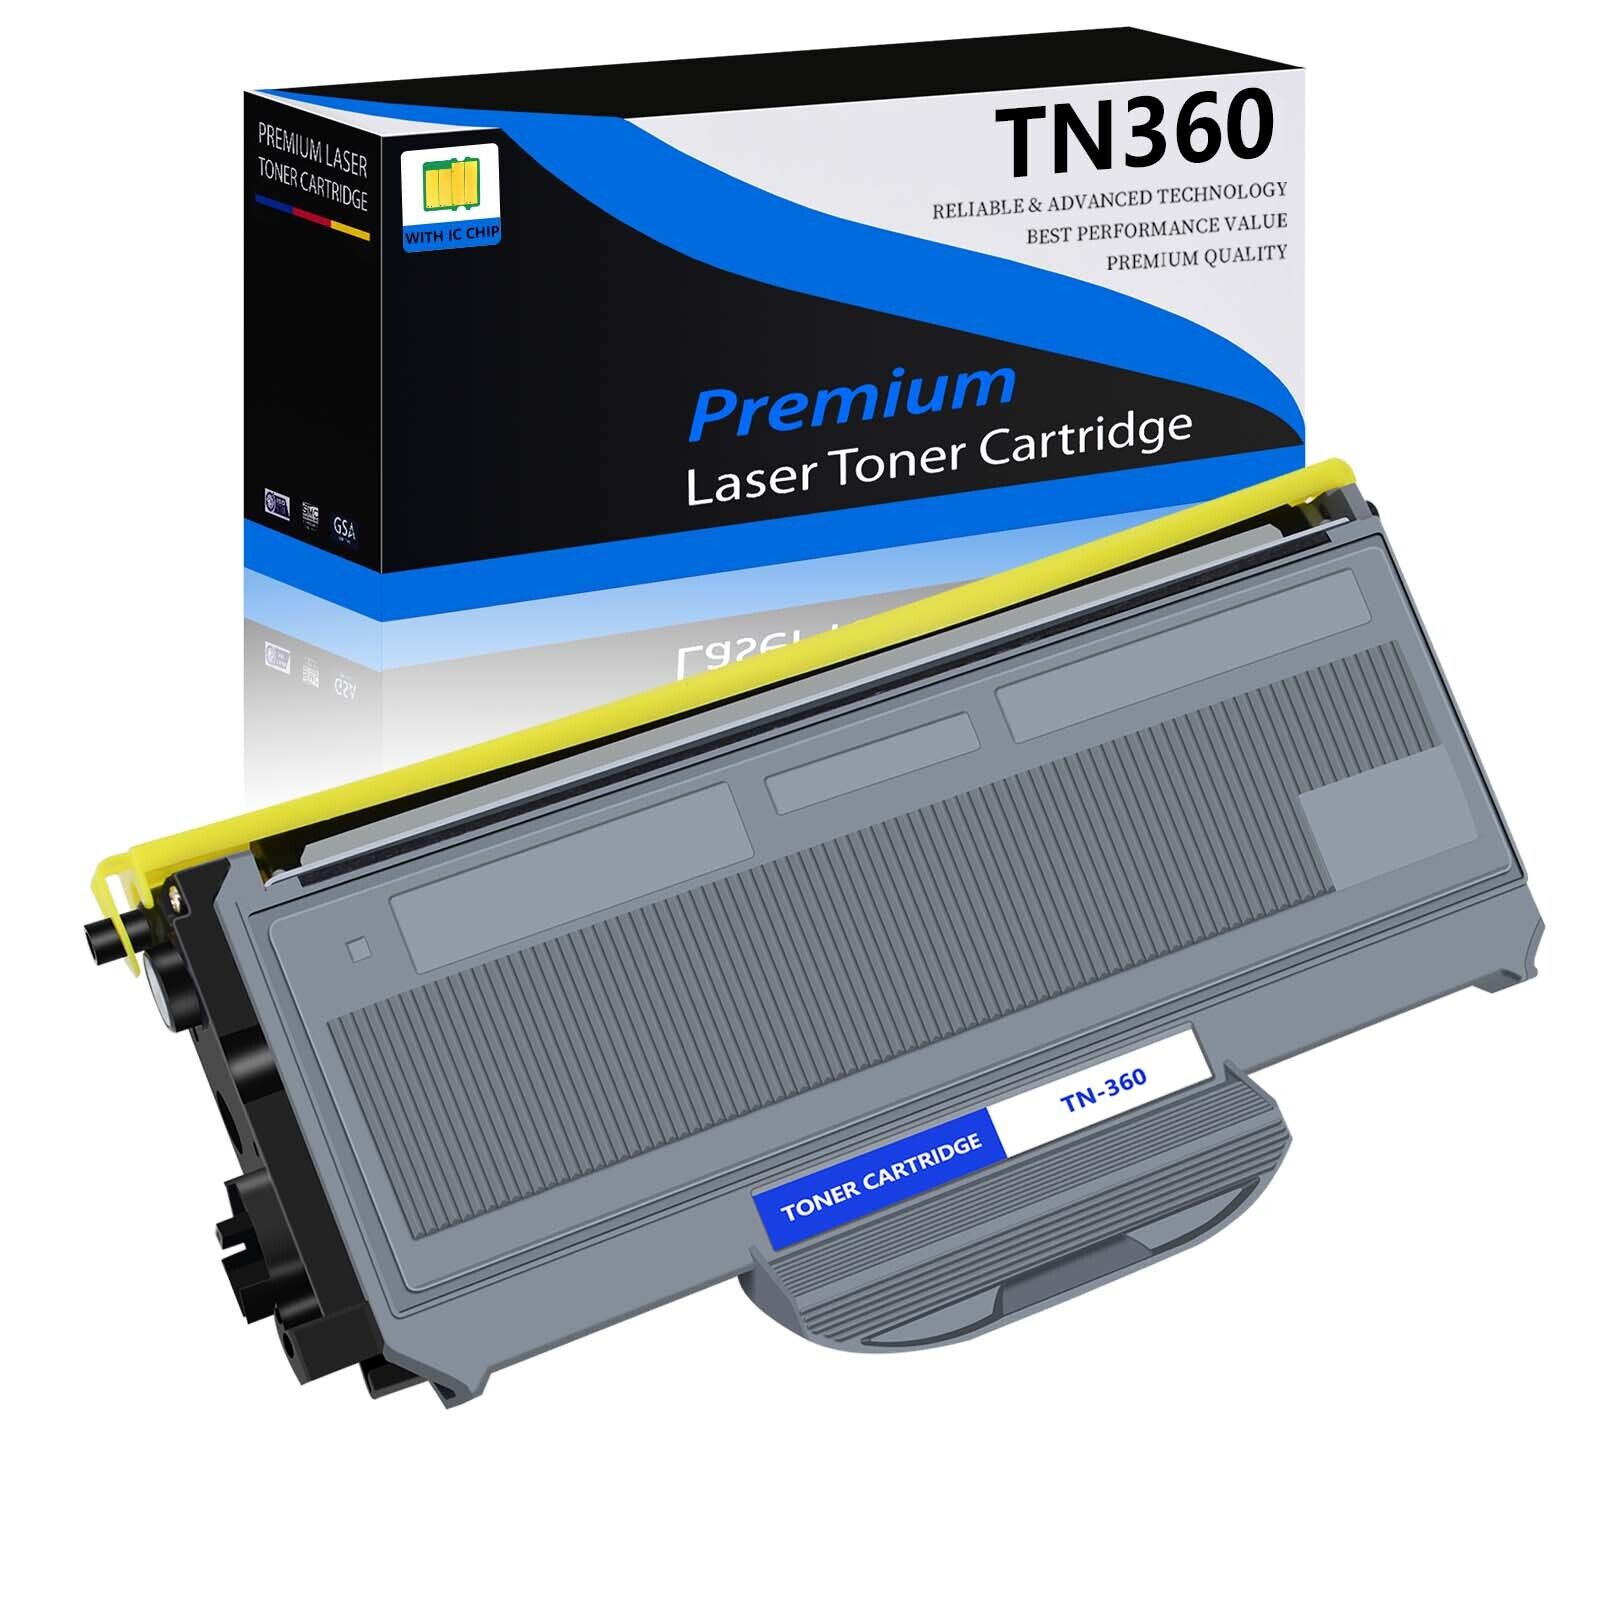 TN360 330 Toner Cartridge DR360 Drum for Brother DCP-7045N MFC-7345DN 7345N LOT